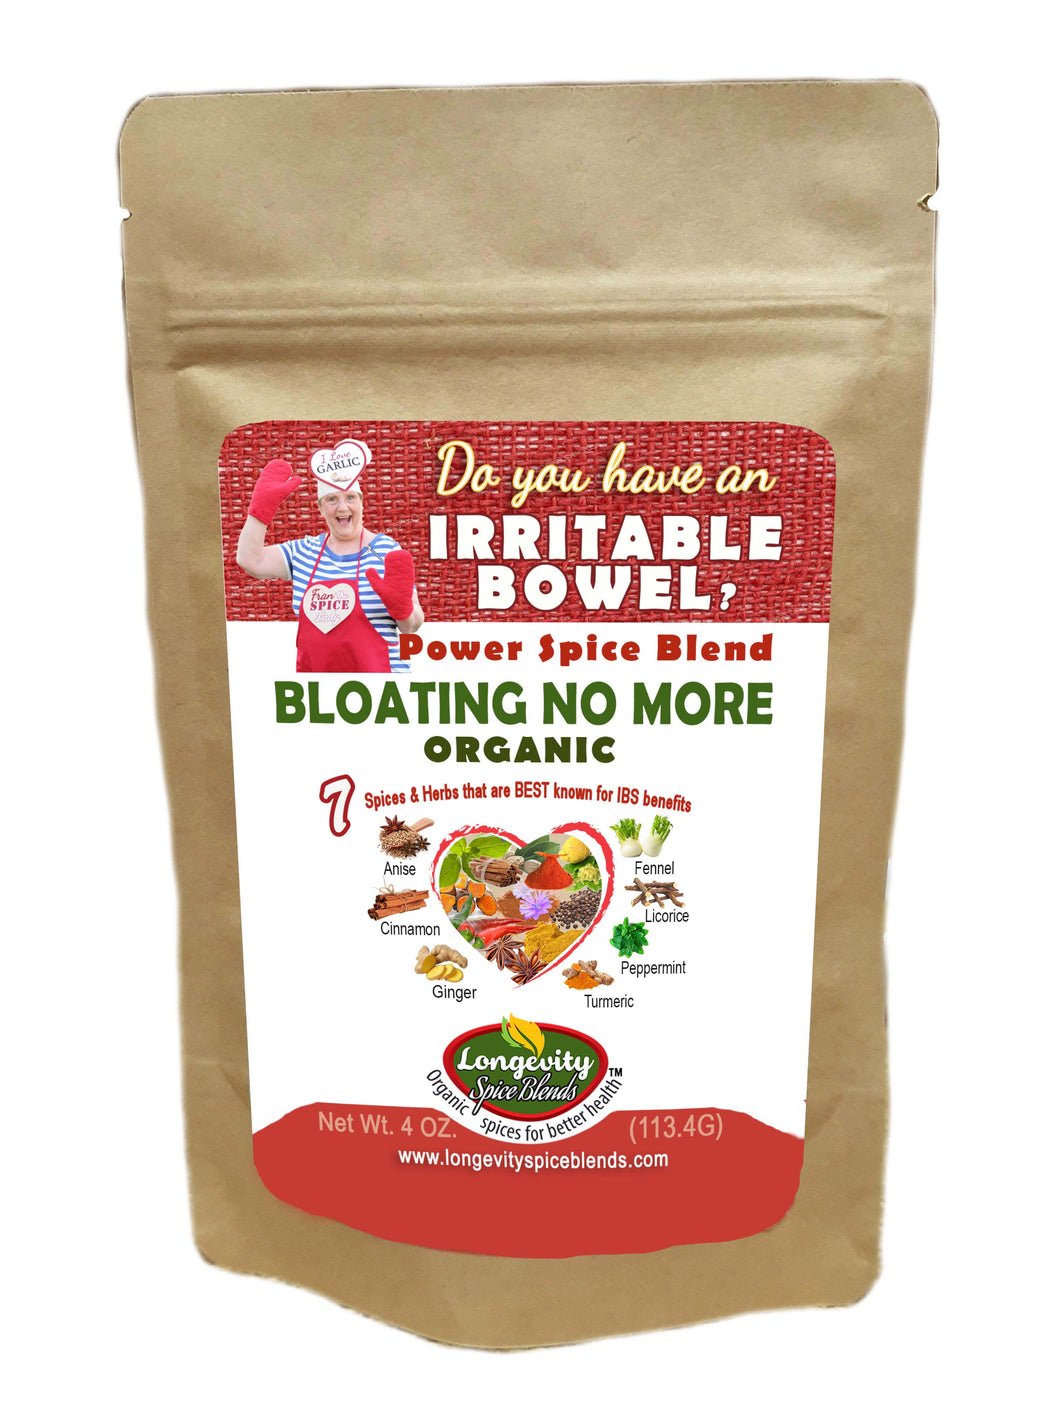 IBS -  Irritable Bowel Spices - Soothing Blend for Digestive Comfort with IBS Support